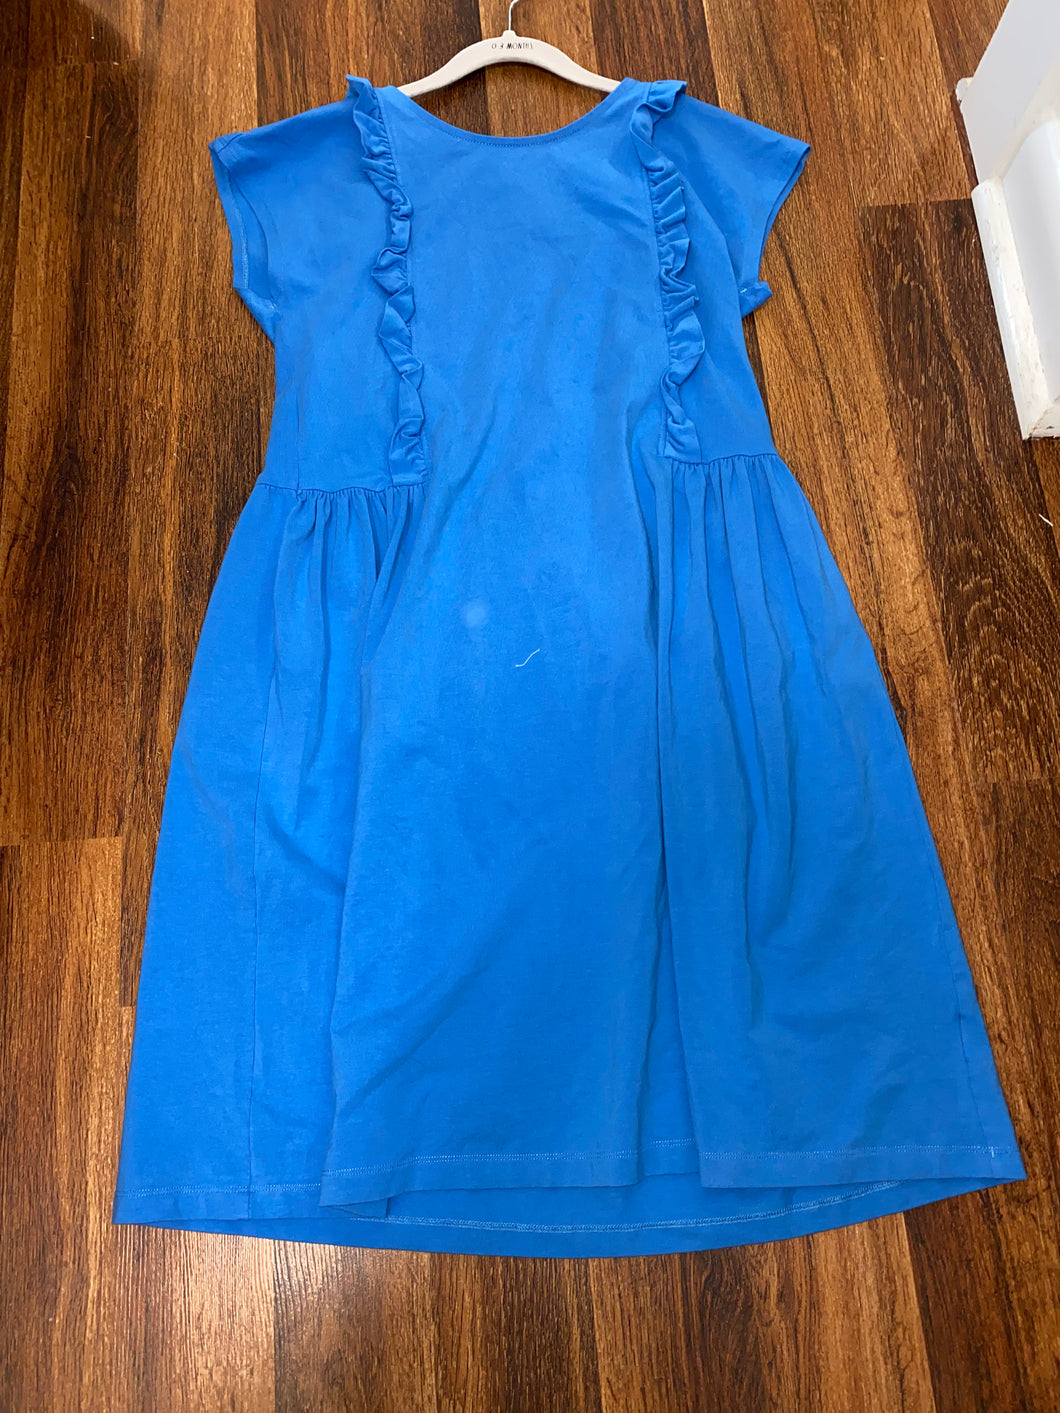 Hanna Andersson size 14/16 dress